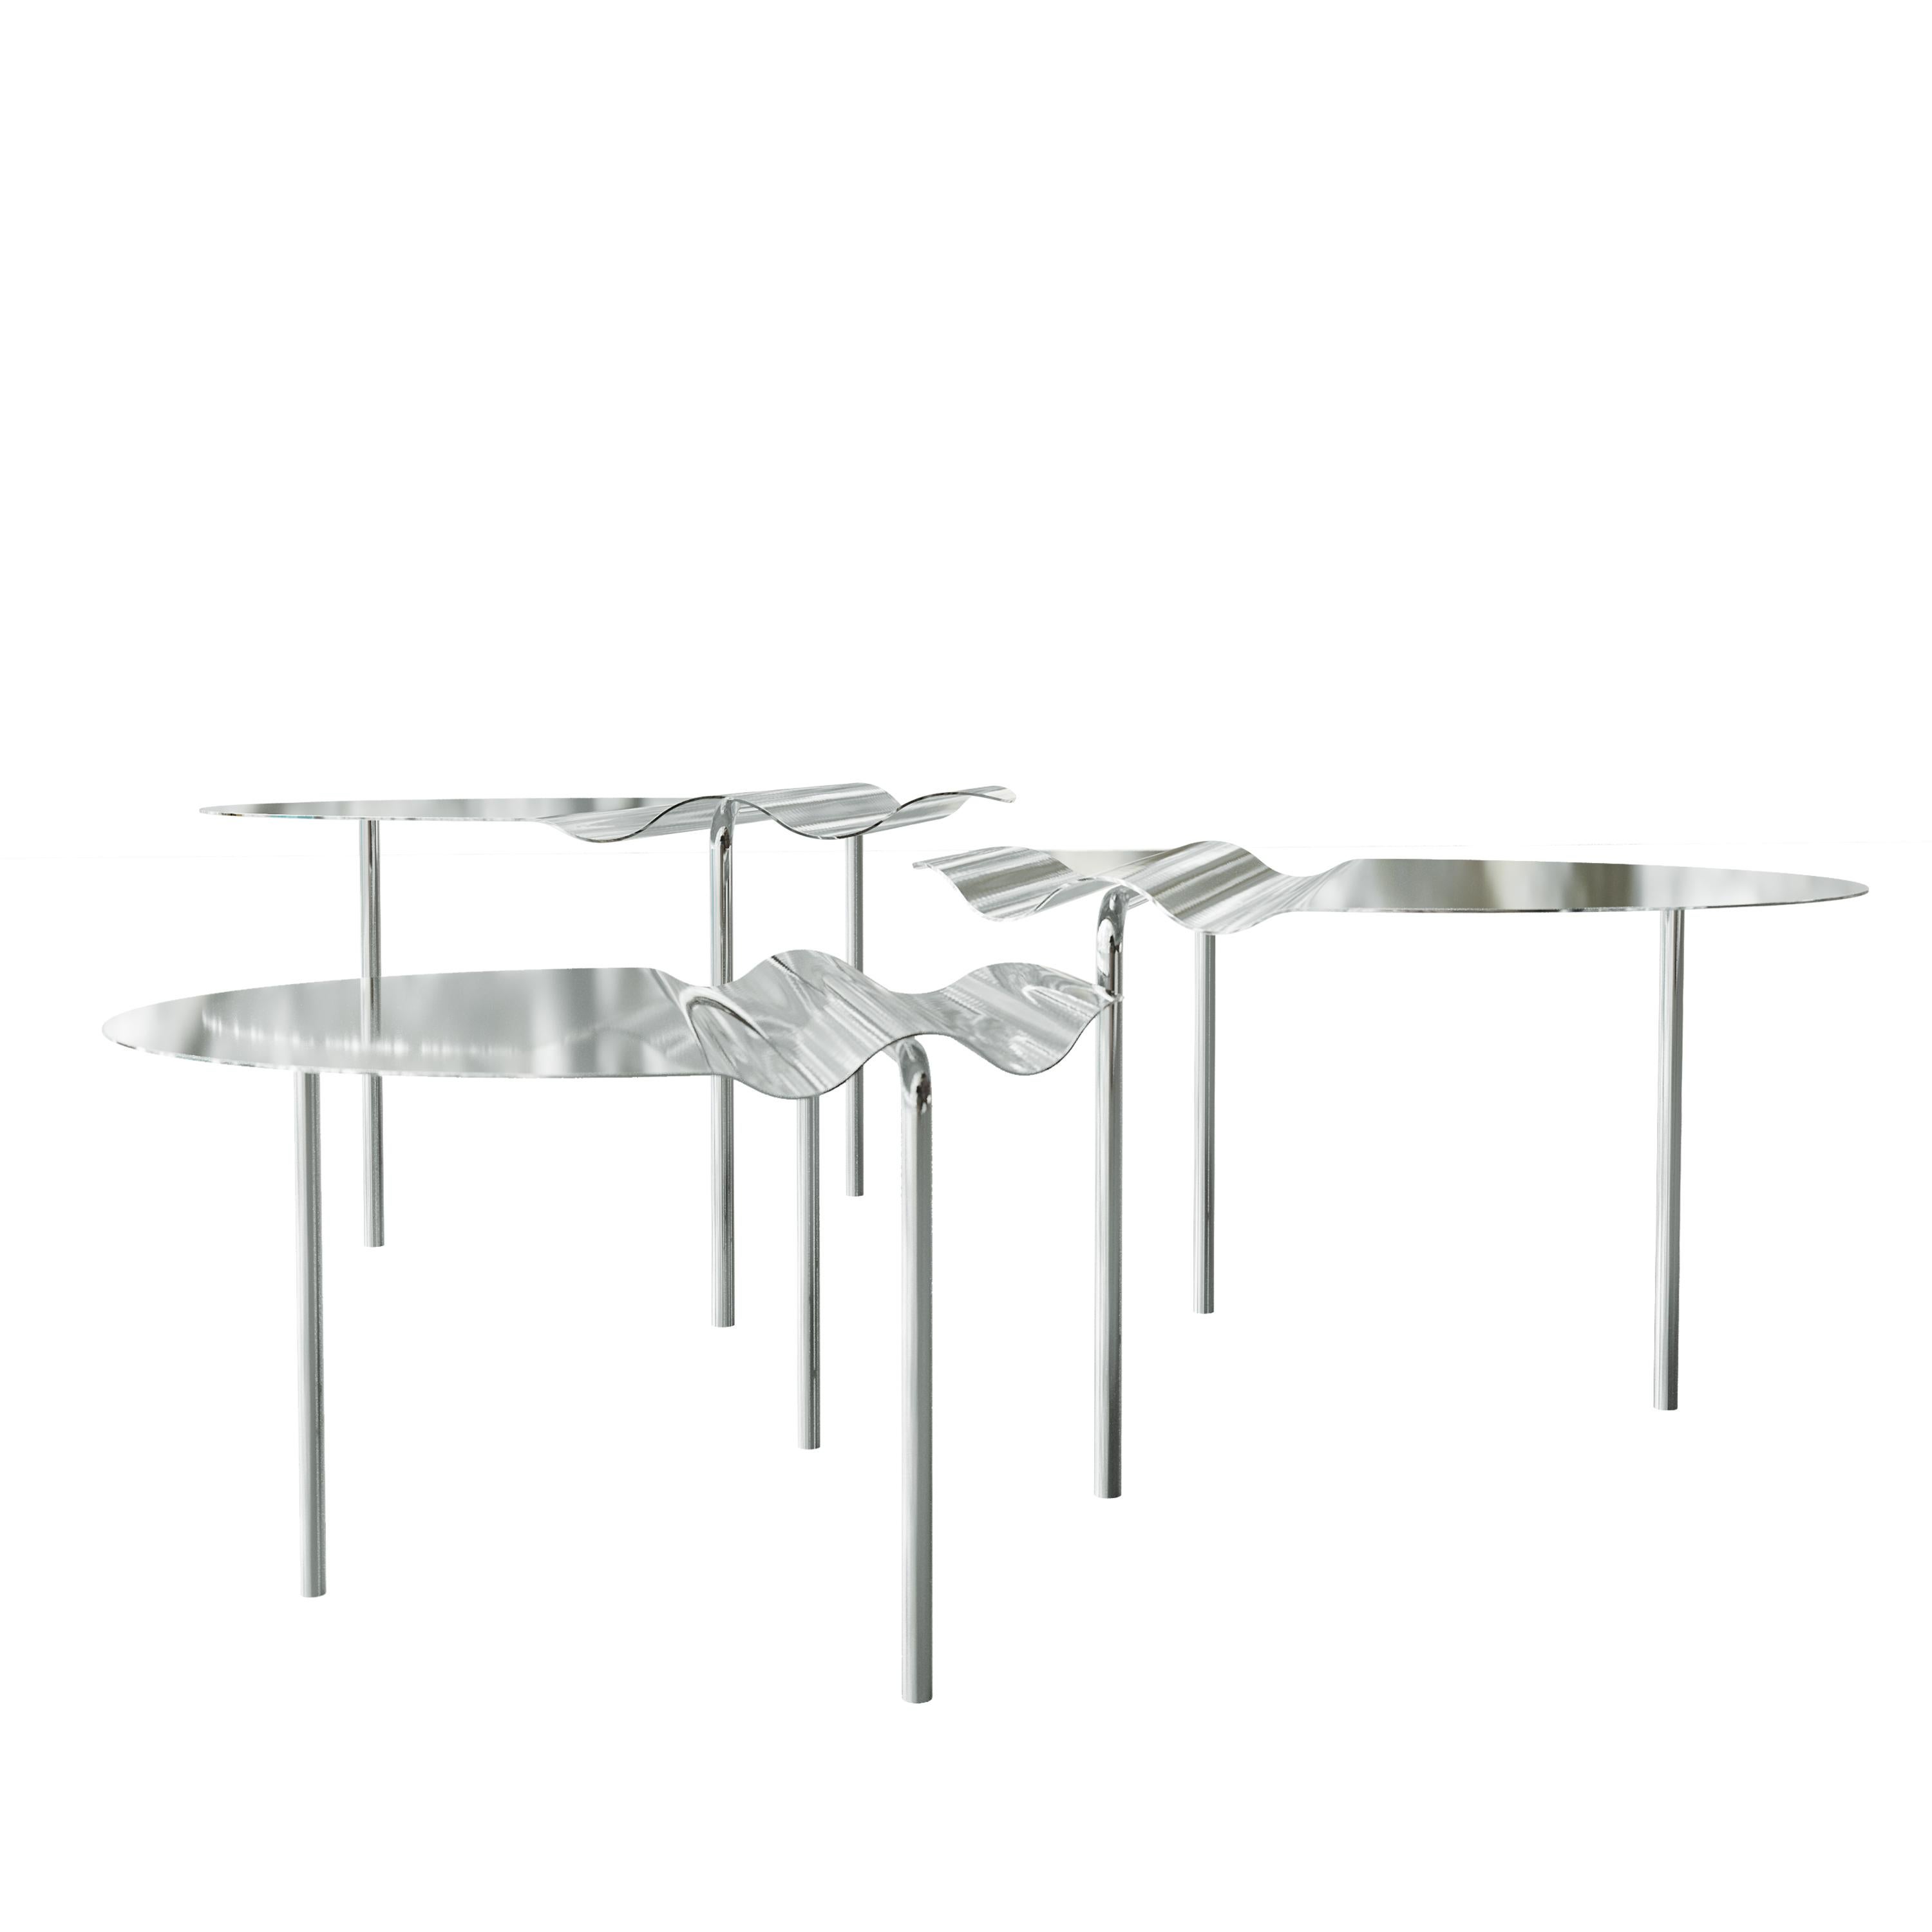 Set of Three Modern Low Tables Mount Made of Stainless Steel by DALI HOME For Sale 7